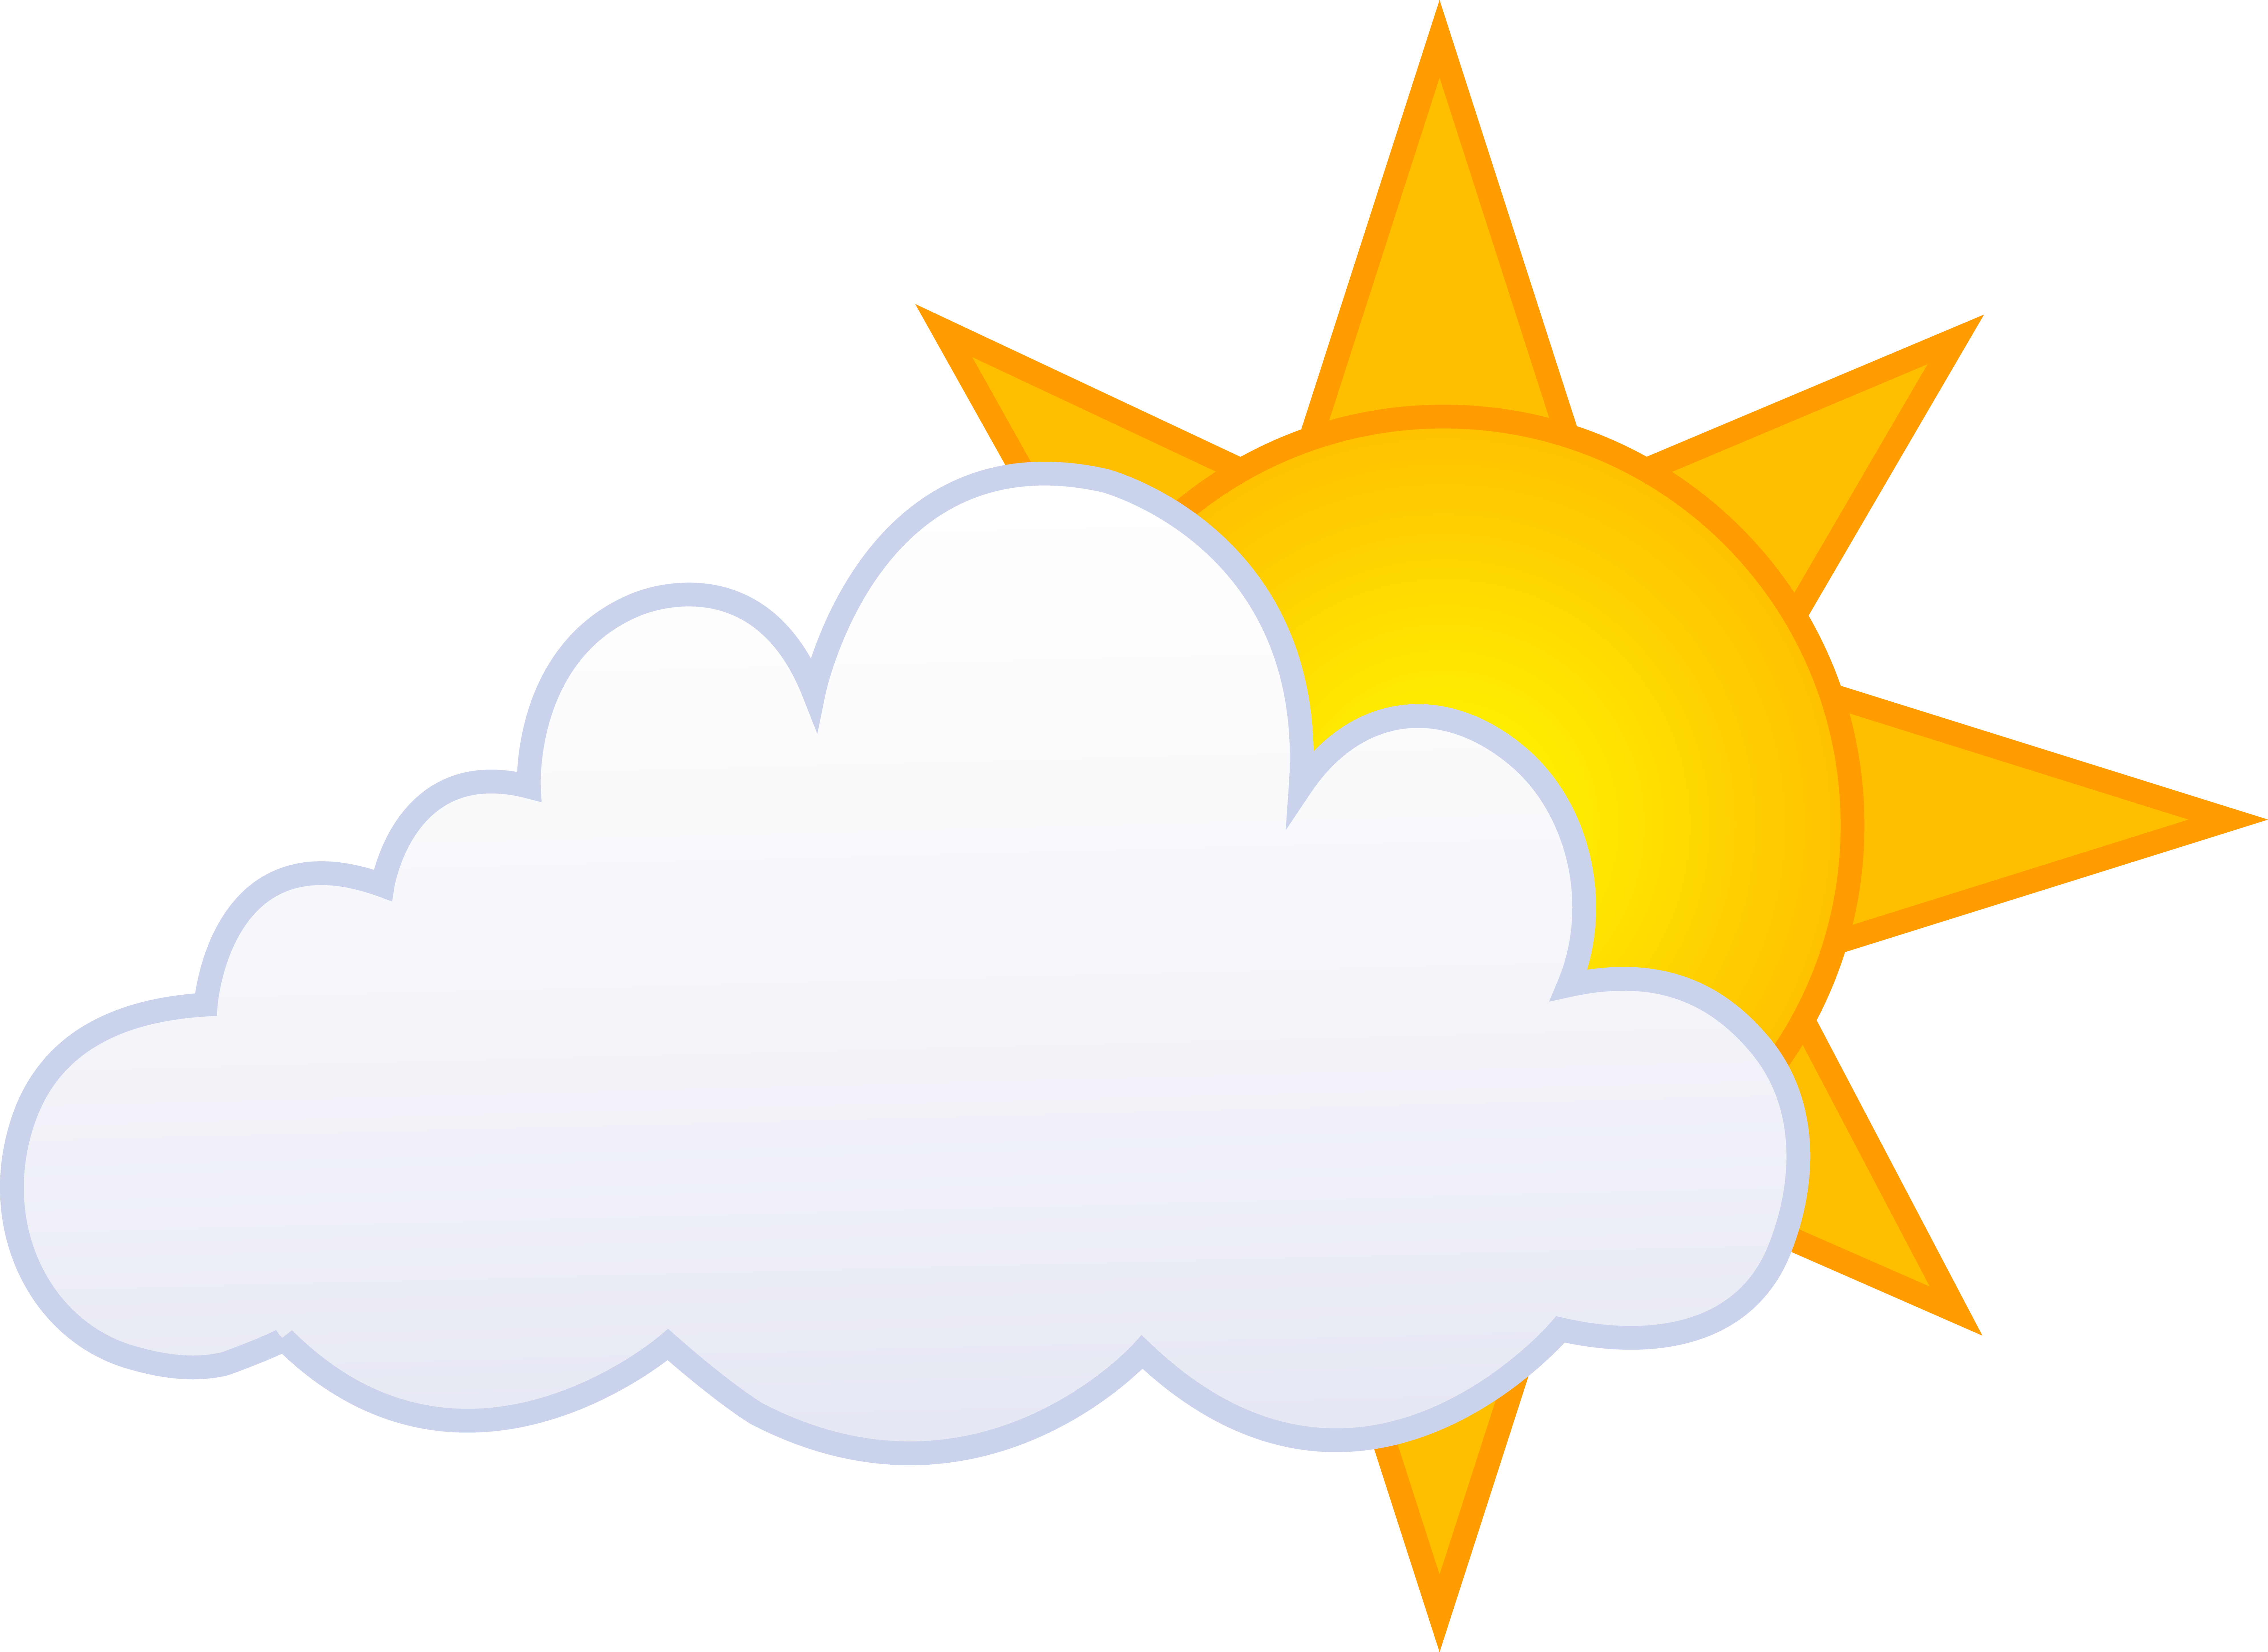 Partly Cloudy With Sun And Rain Weather Icon Clip Art - Inner Earth Corey Goode (7951x5793)